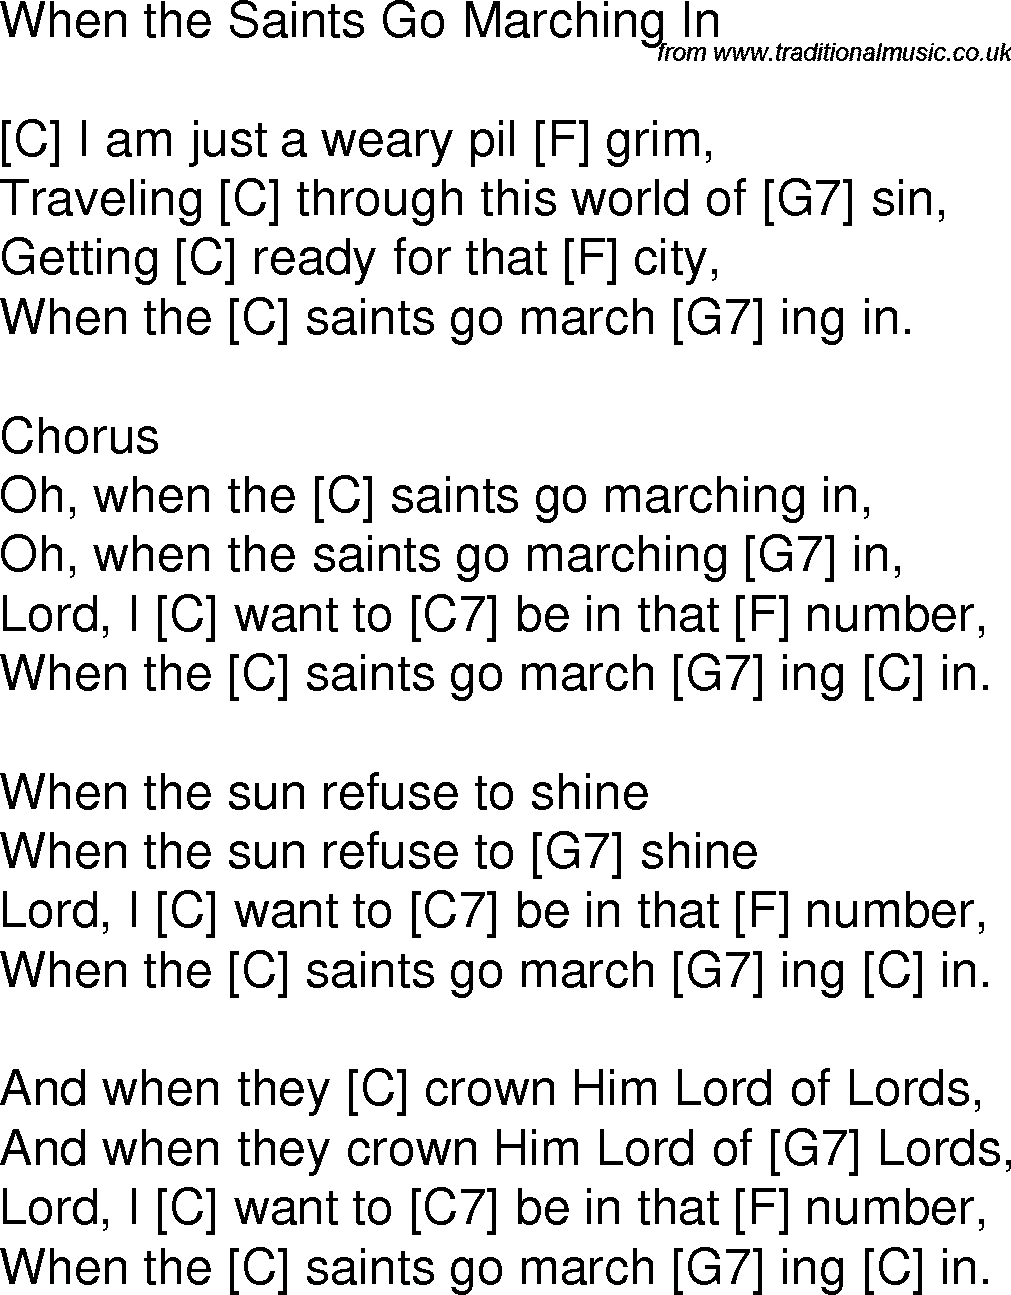 Old time song lyrics with chords for When The Saints Go Marching In C